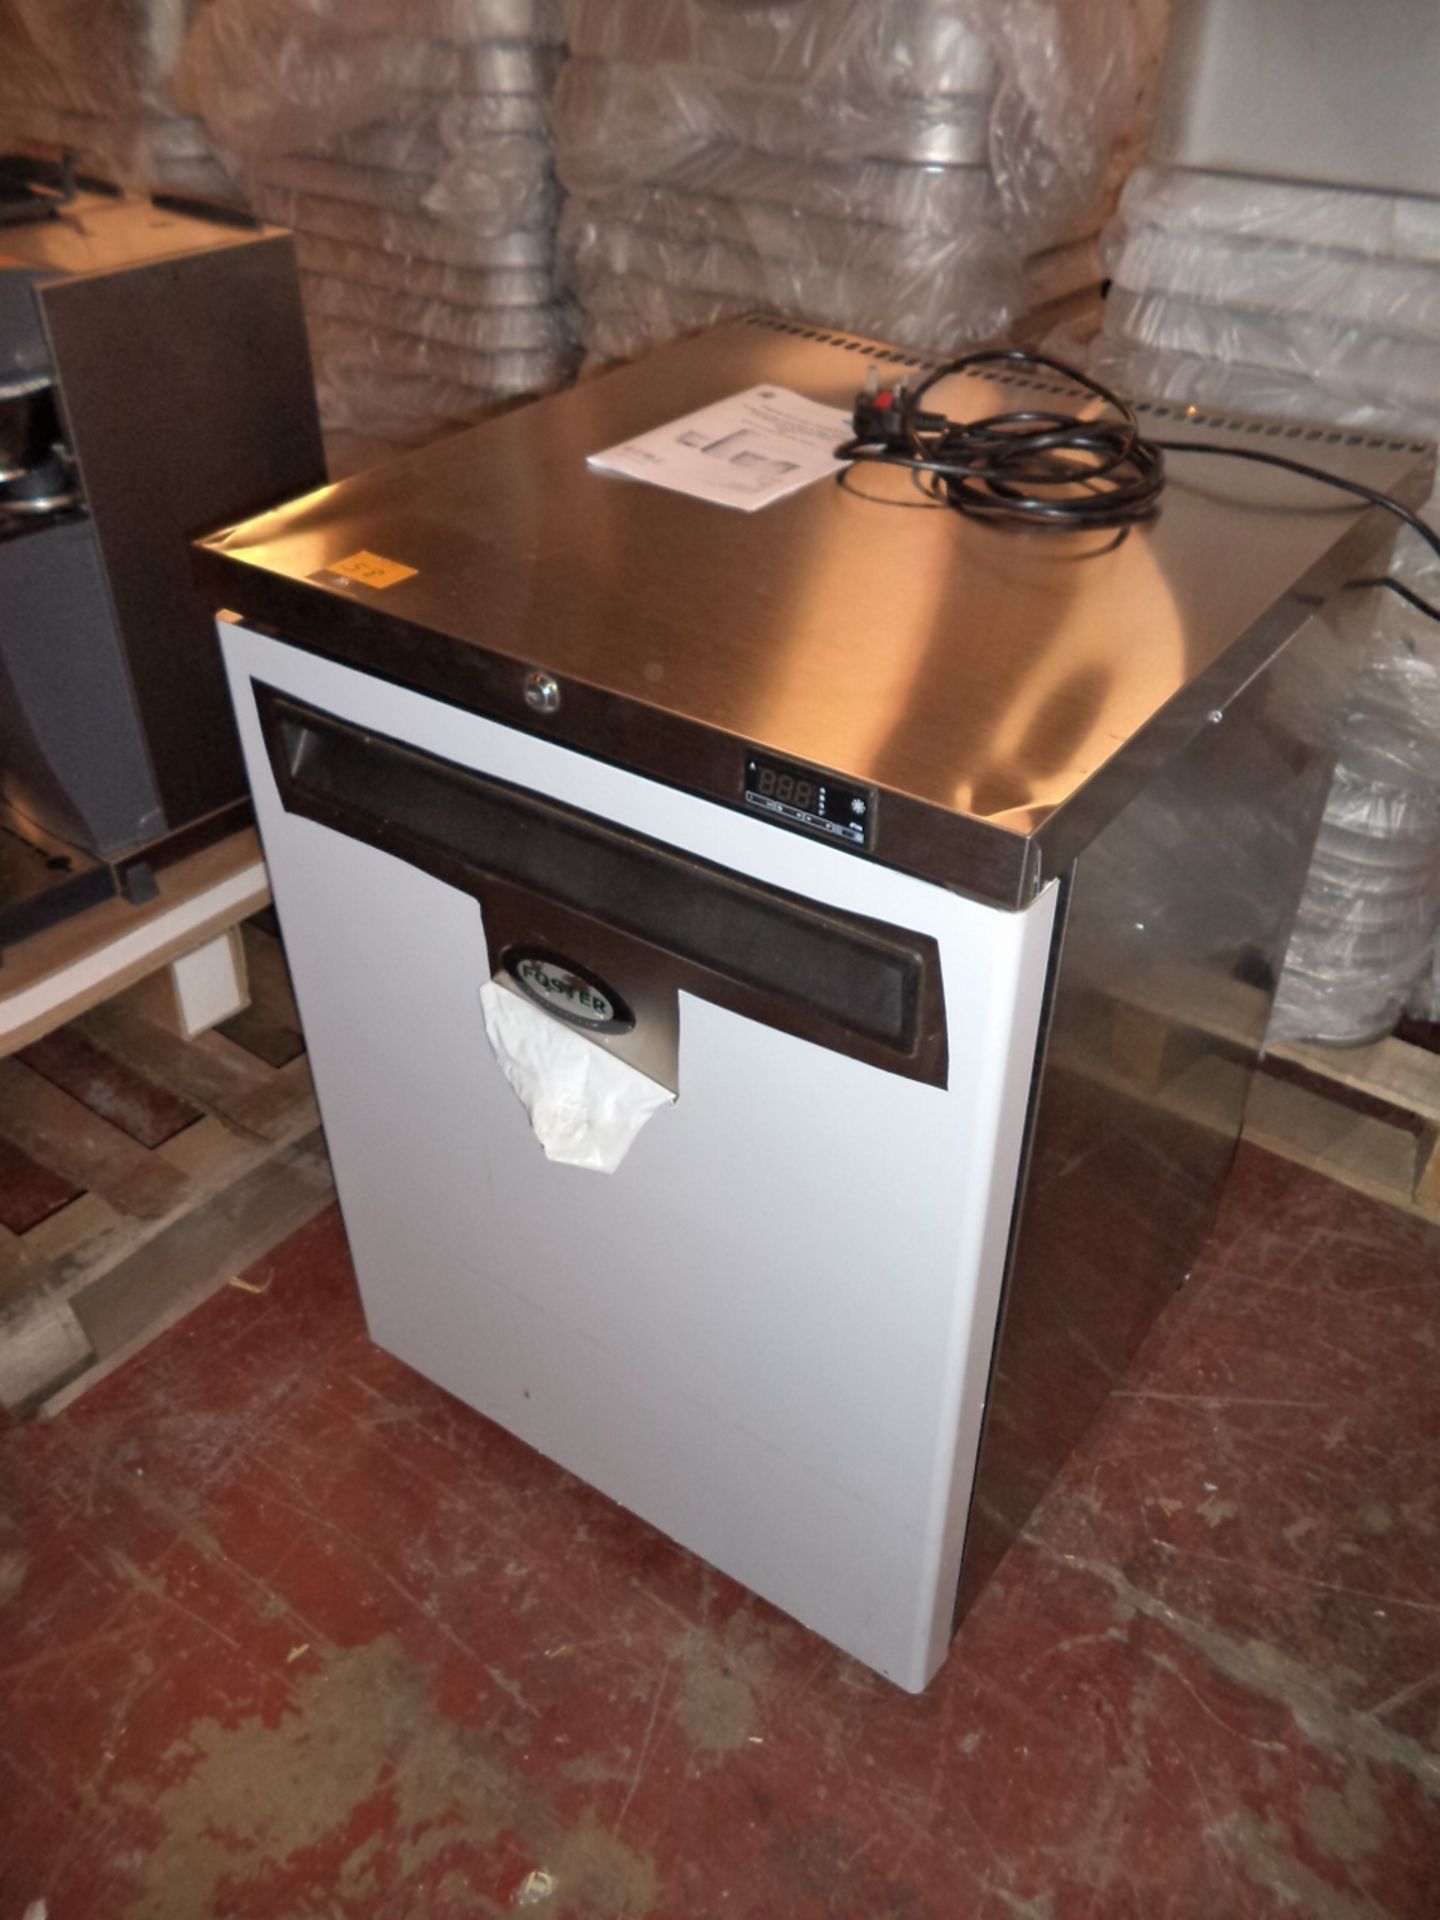 Foster stainless steel counter height fridge in stainless steel